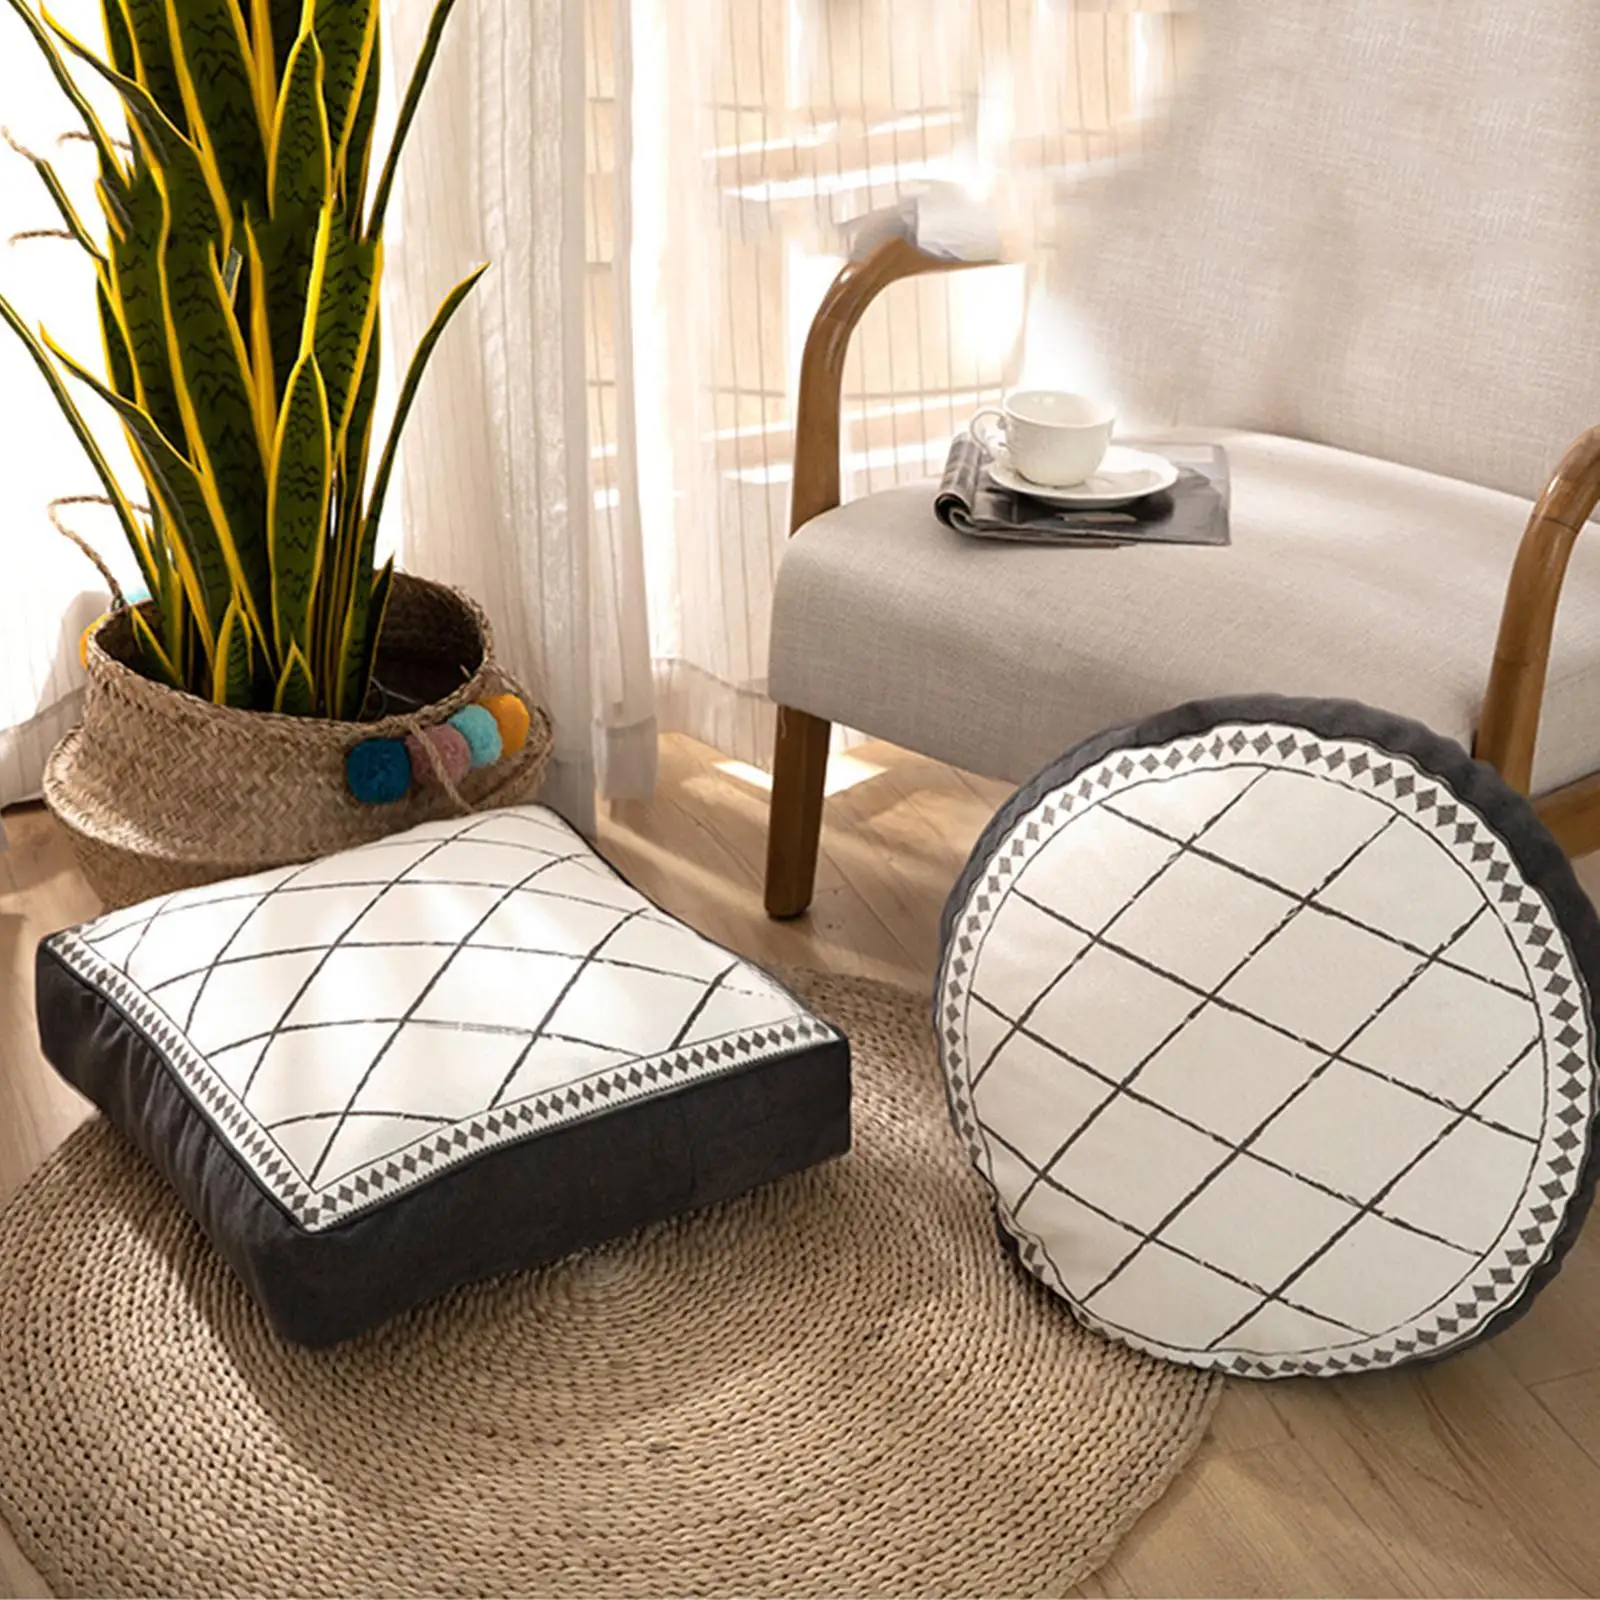 Large Pouf Cover Living Room Decoration Ottomans Footstools Textured Unstuffed Ottoman Pouffe Cover Patio Seat Cover Foot Stool